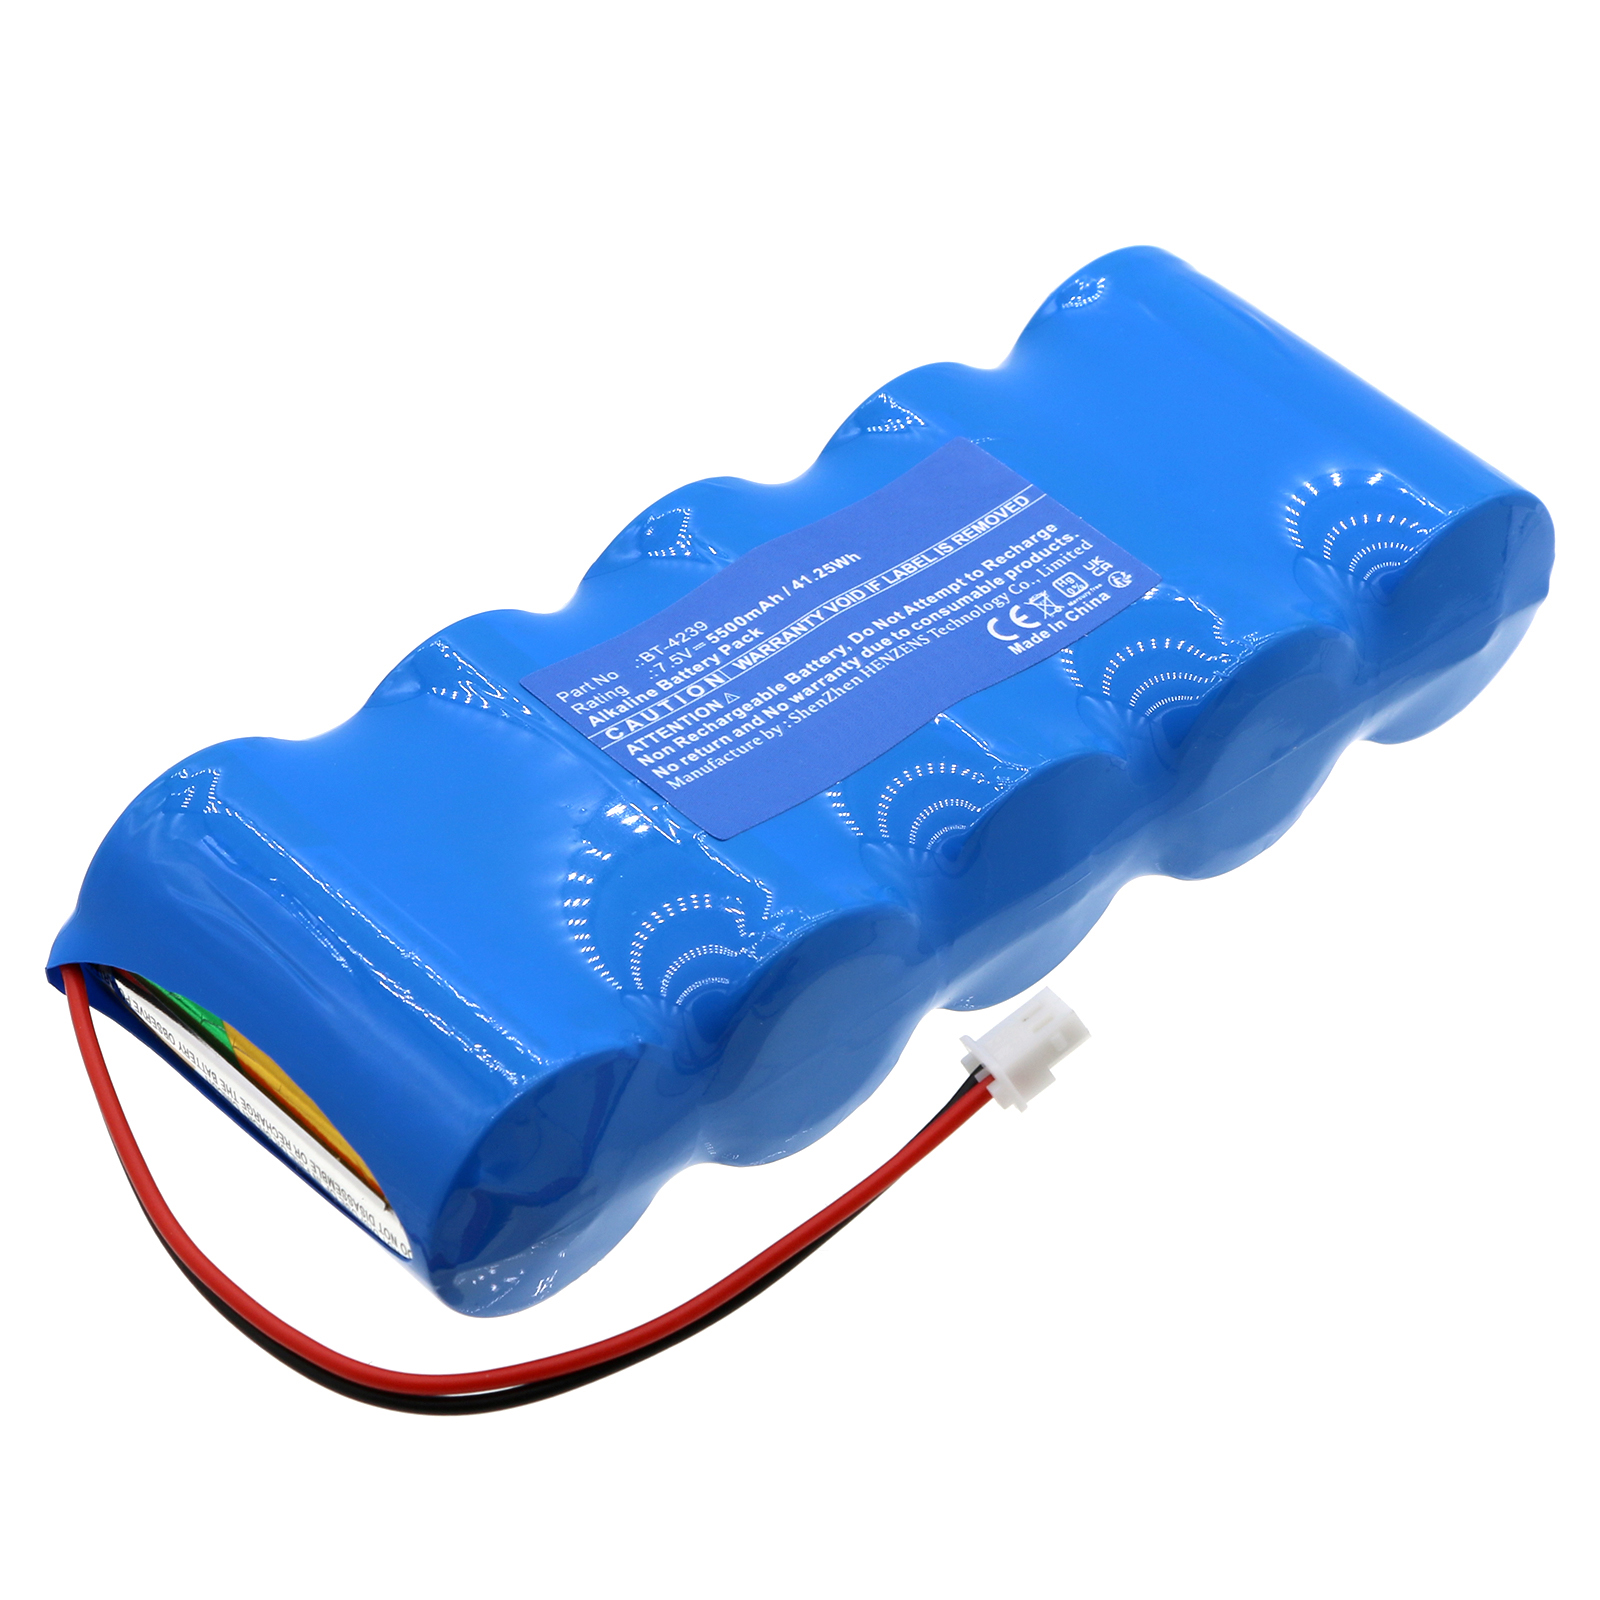 Synergy Digital Alarm System Battery, Compatible with Bticino BT-4239 Alarm System Battery (Alkaline, 7.5V, 5500mAh)